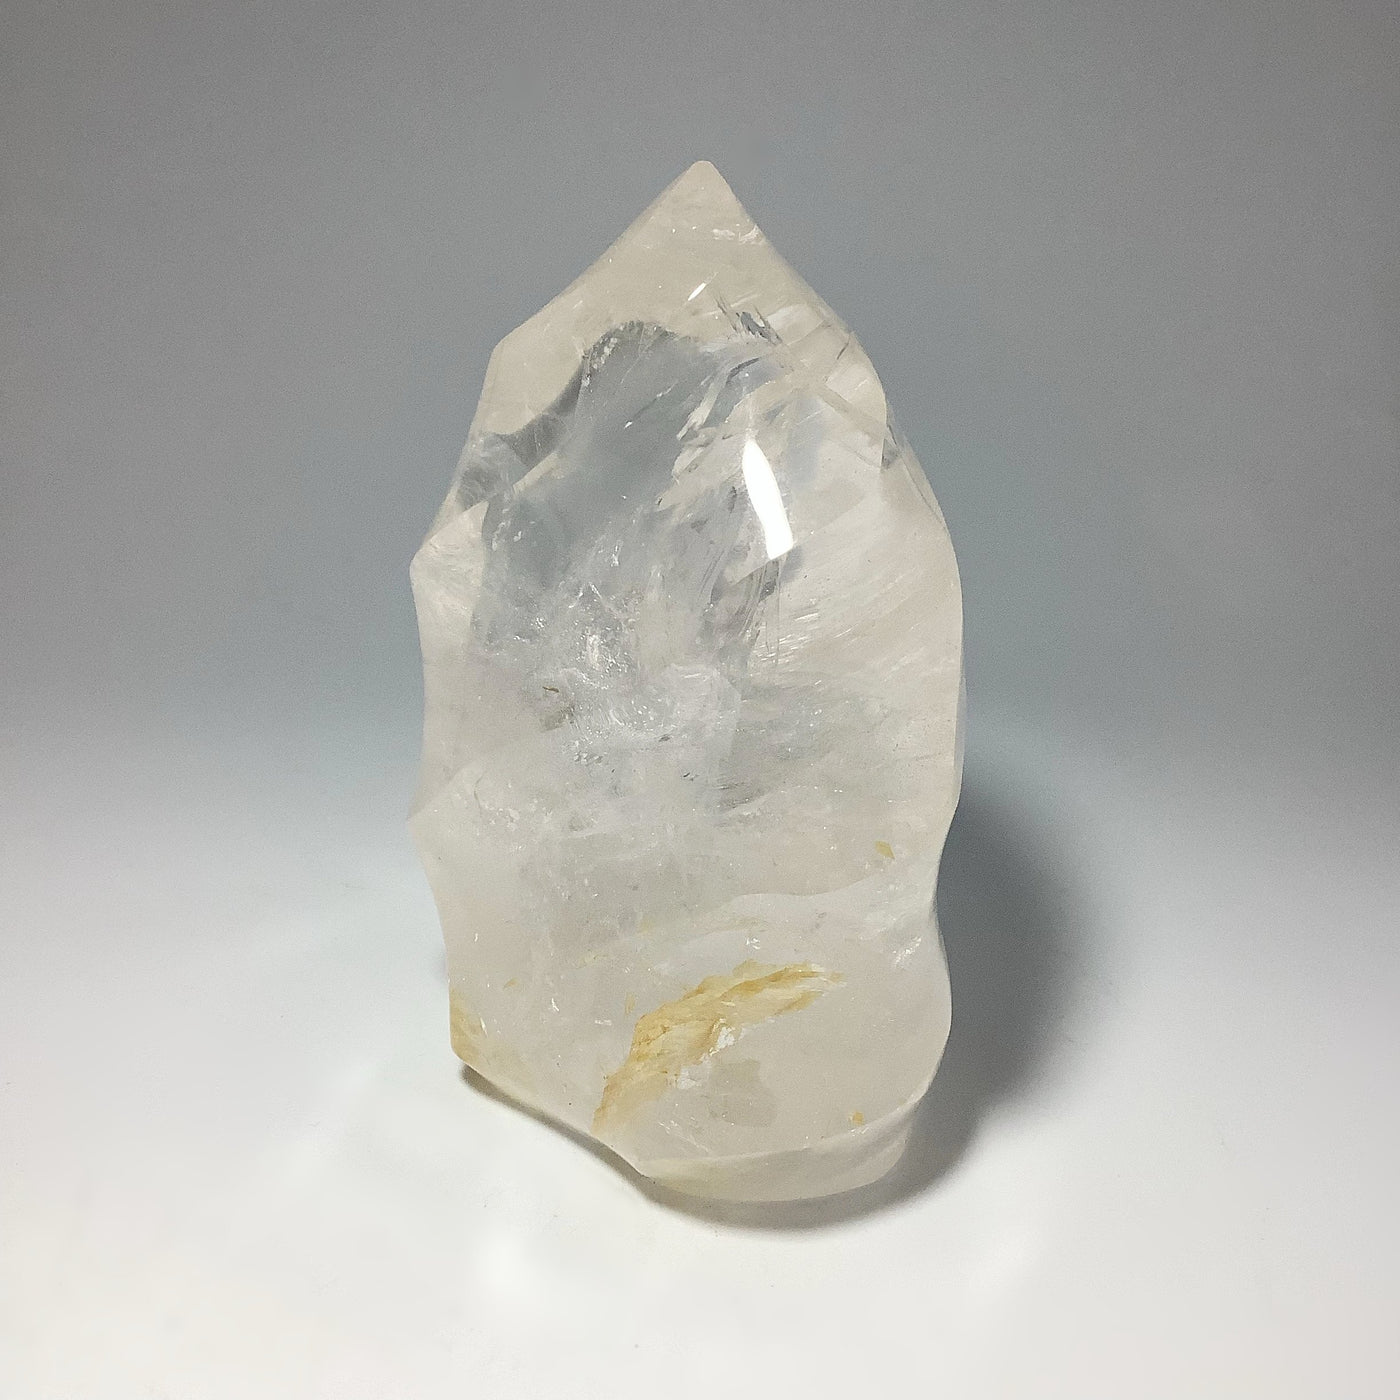 Carved Quartz with Hematoid Inclusions Flame